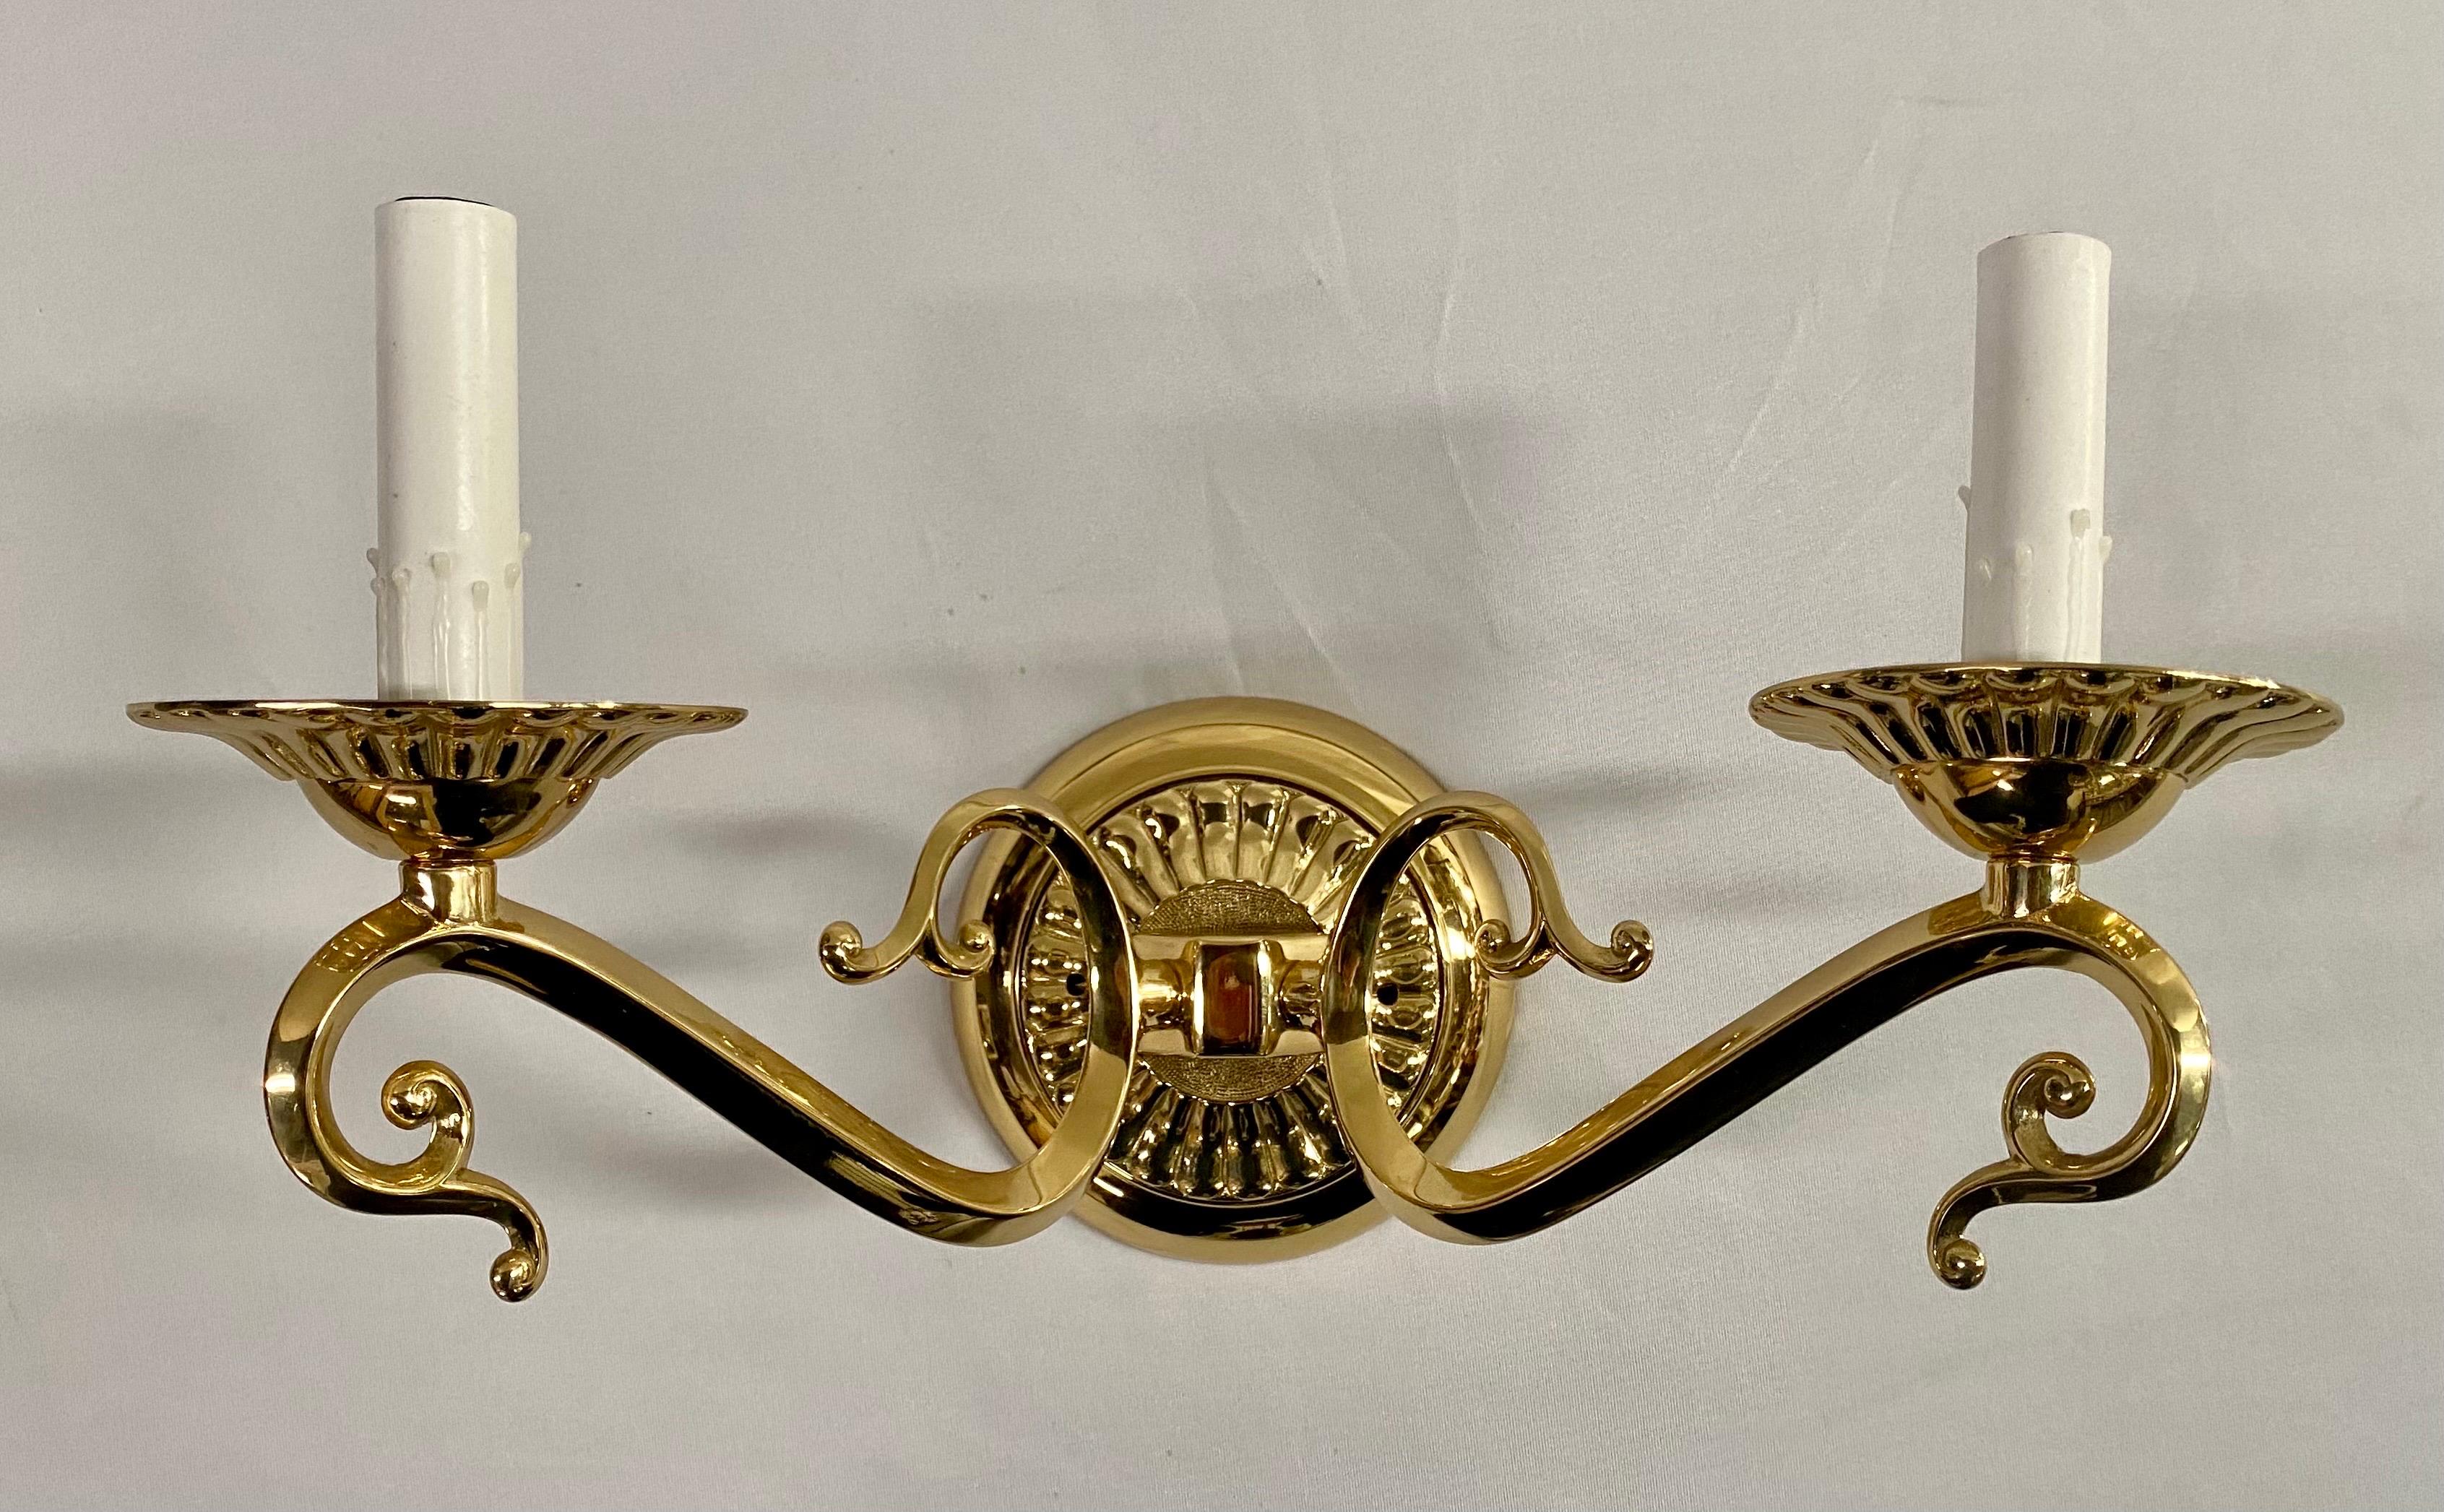 Transport yourself to the elegant era of English Victorian charm with these exquisite brass wall sconces. Each sconce, a masterpiece in its own right, boasts two arcing arms that evoke the essence of a bygone era. These arms are adorned with a